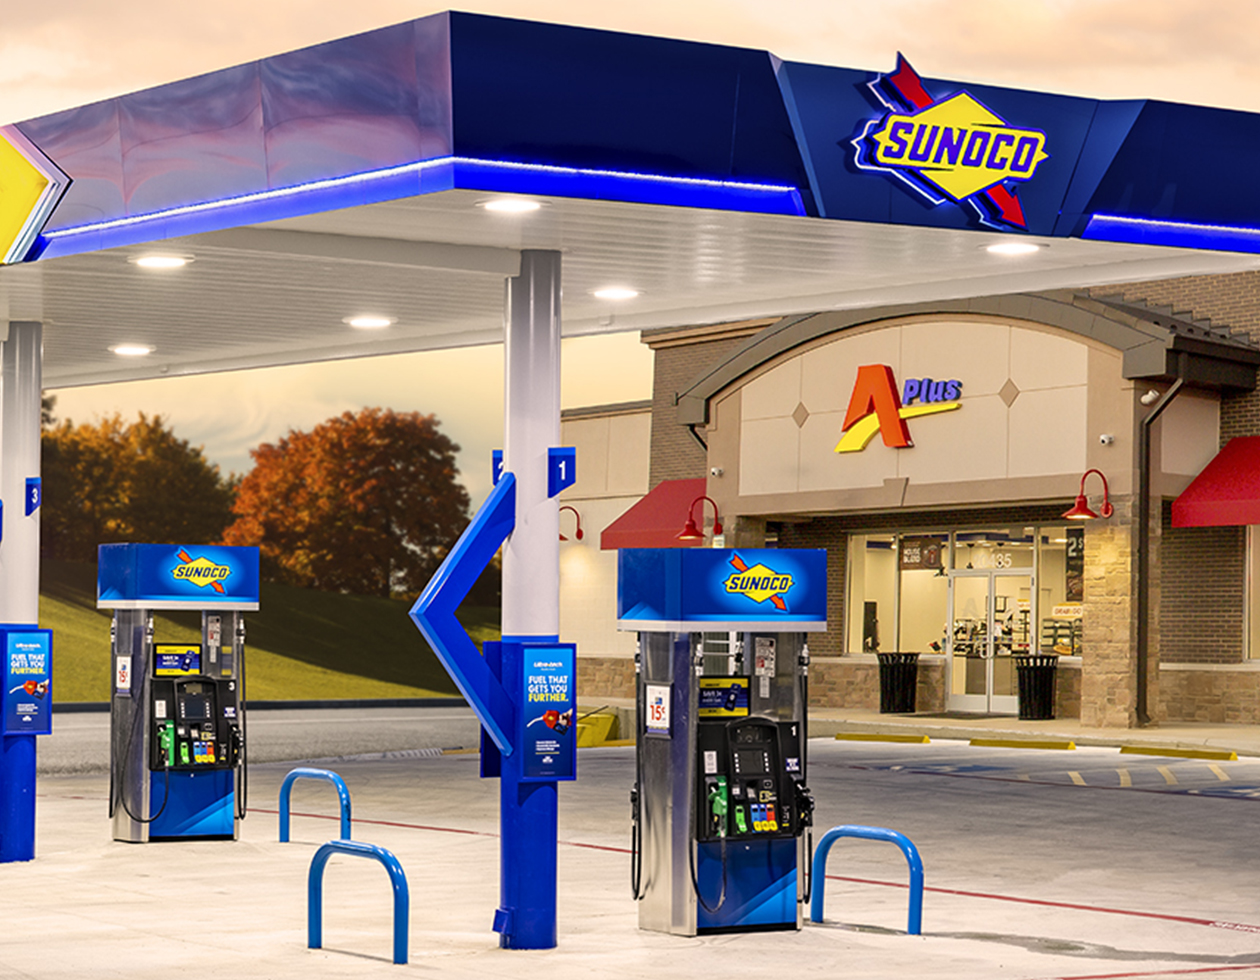 Sunoco gas station and pumps